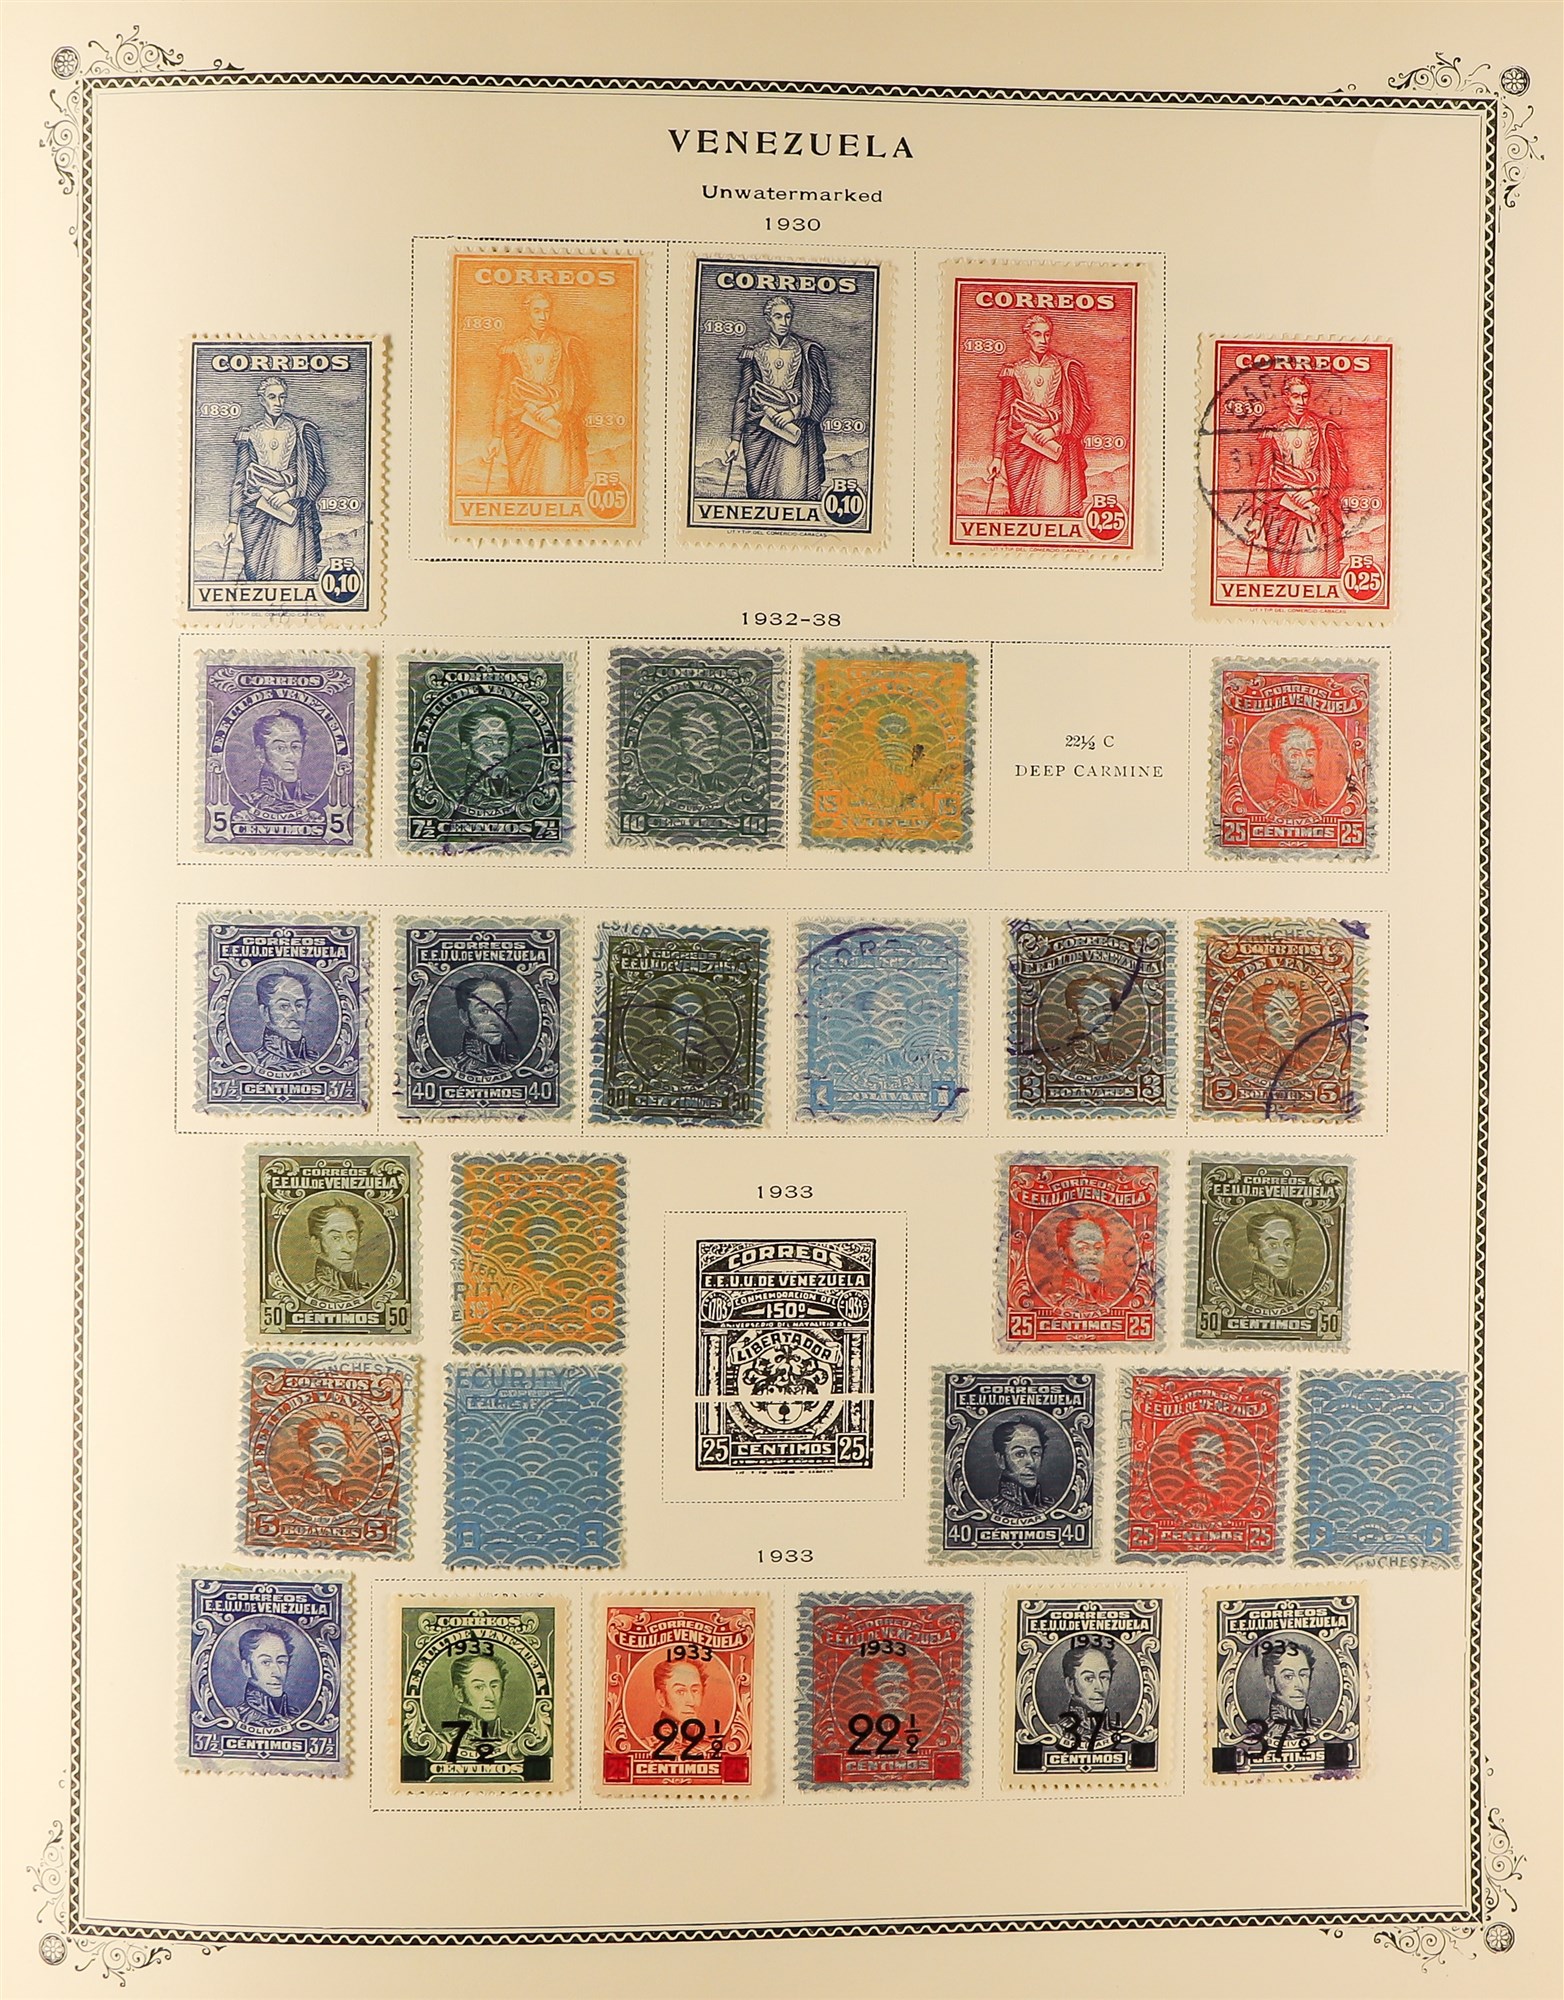 VENEZUELA 1859 - 1976 COLLECTION of 1500+ mint & used stamps in album, note 1859-62 Coat of Arms, - Image 12 of 19